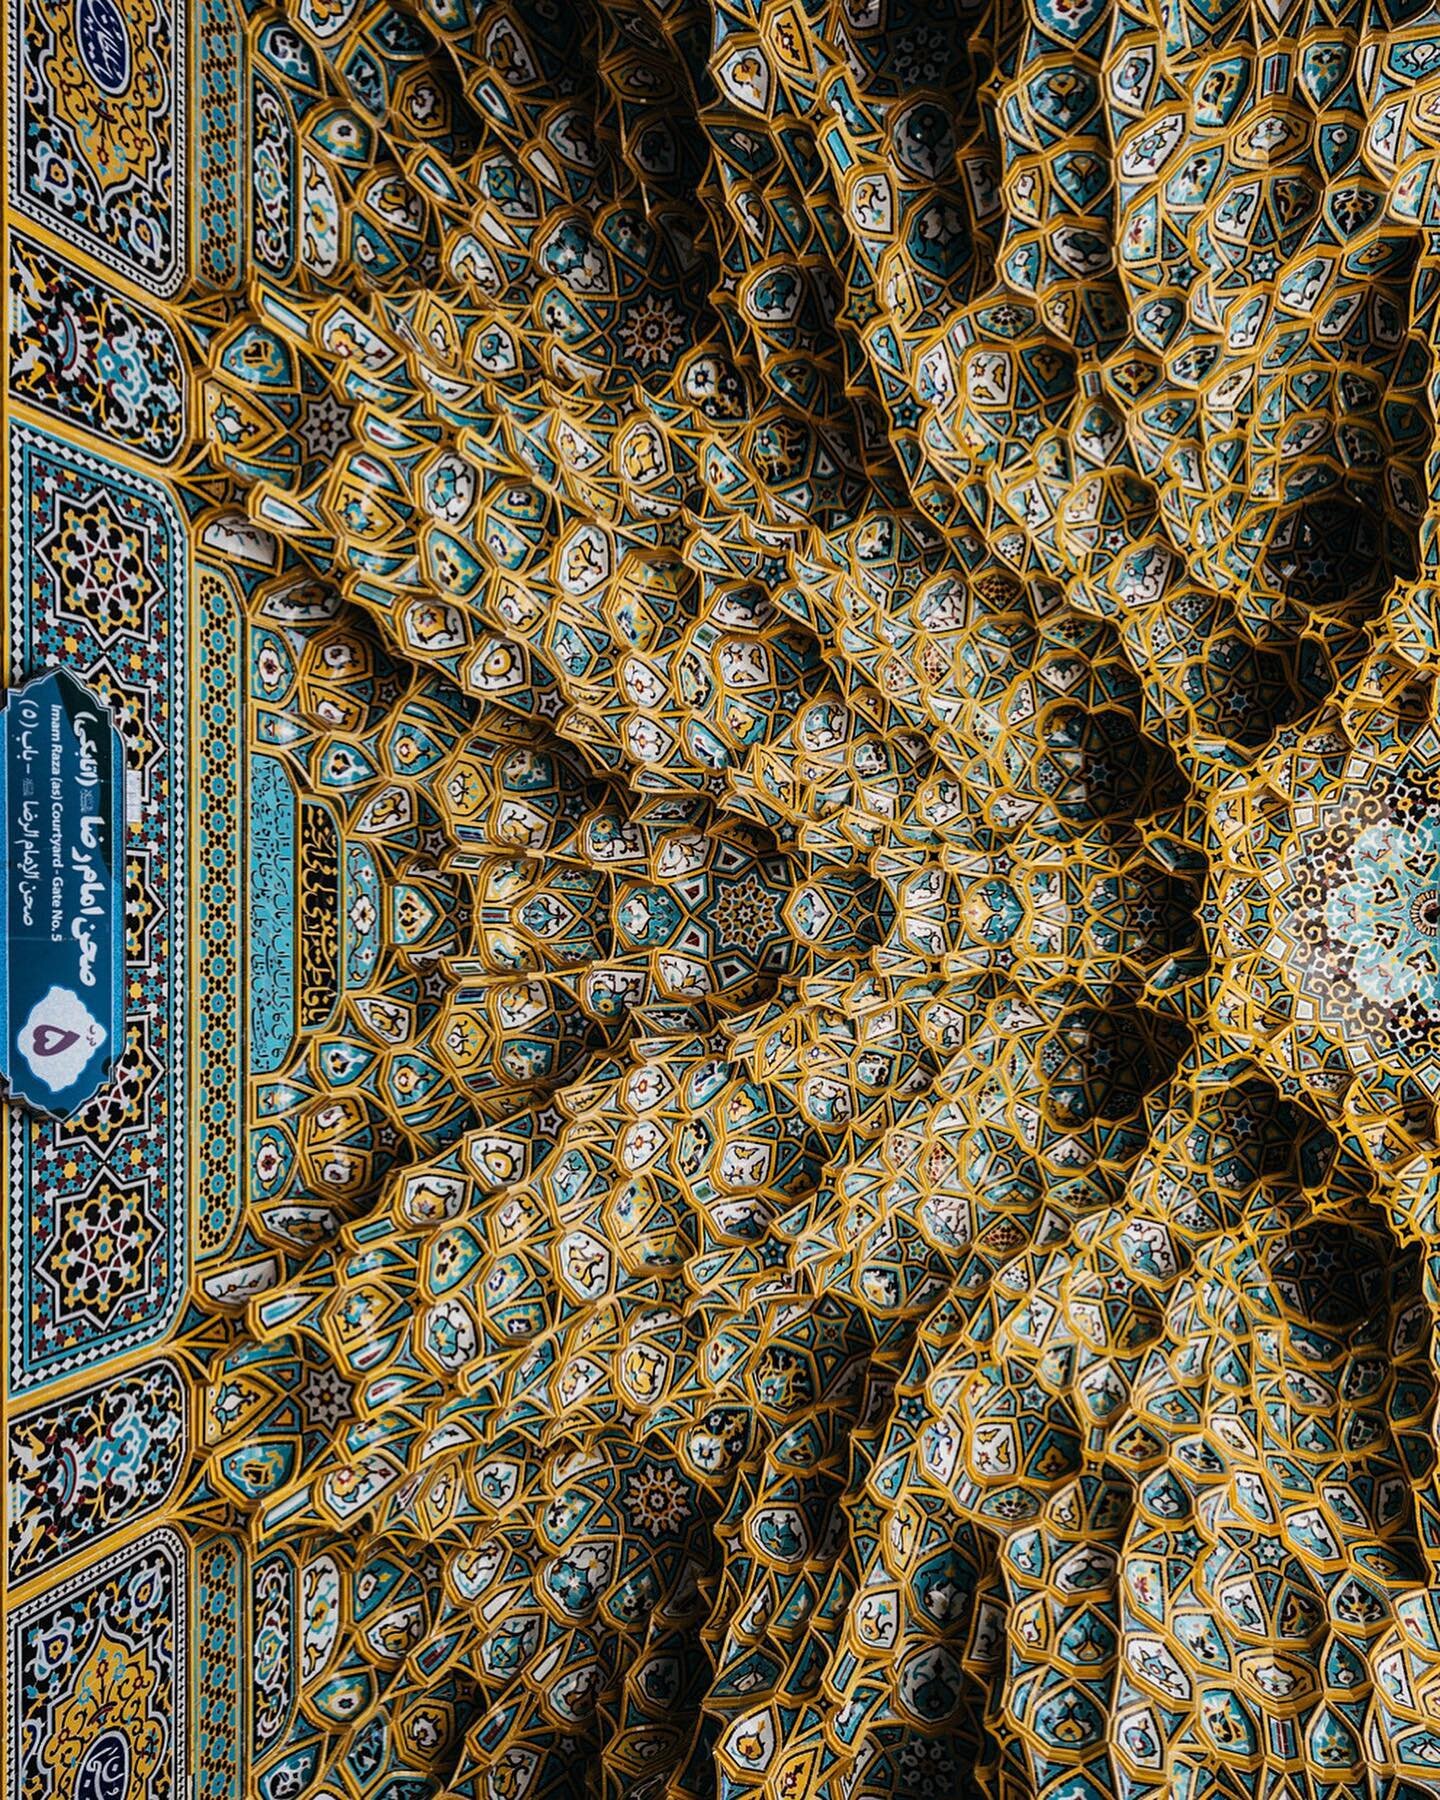 Ceiling details from the Shrine of Fatima Masumeh in Qom. This photo features in my new exhibition &lsquo;The Silk Road: A Living History&rsquo; in London&rsquo;s King&rsquo;s Cross. Presented by @akf_uk. 
&mdash;&mdash;&mdash;
#iran #geometry #cntra